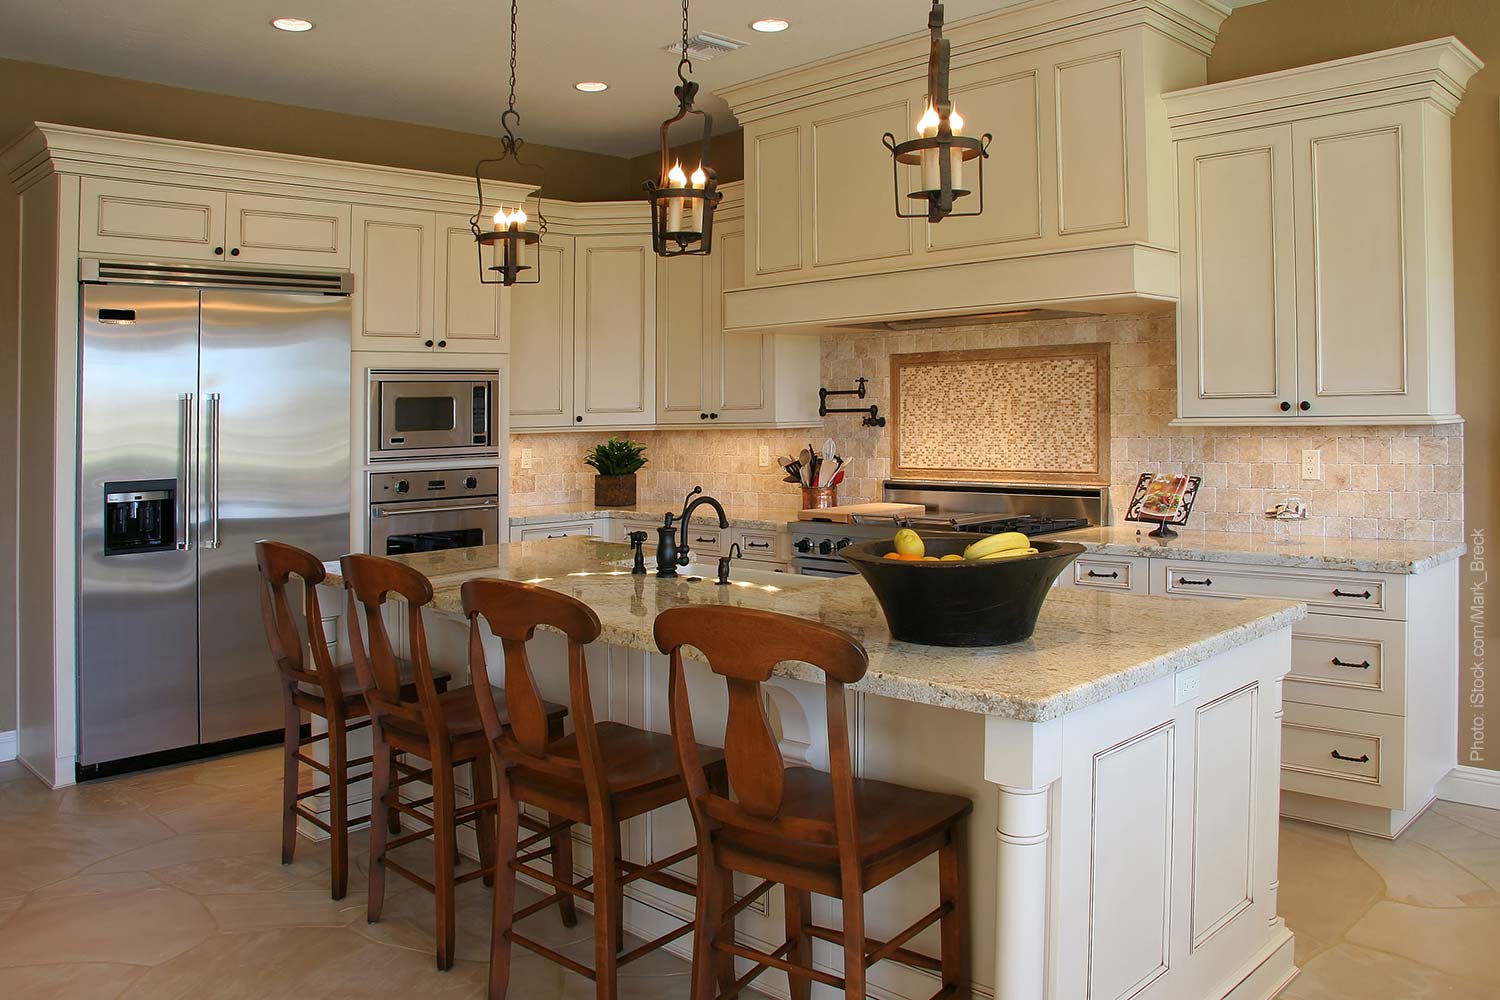 A newly remodeled luxury kitchen.